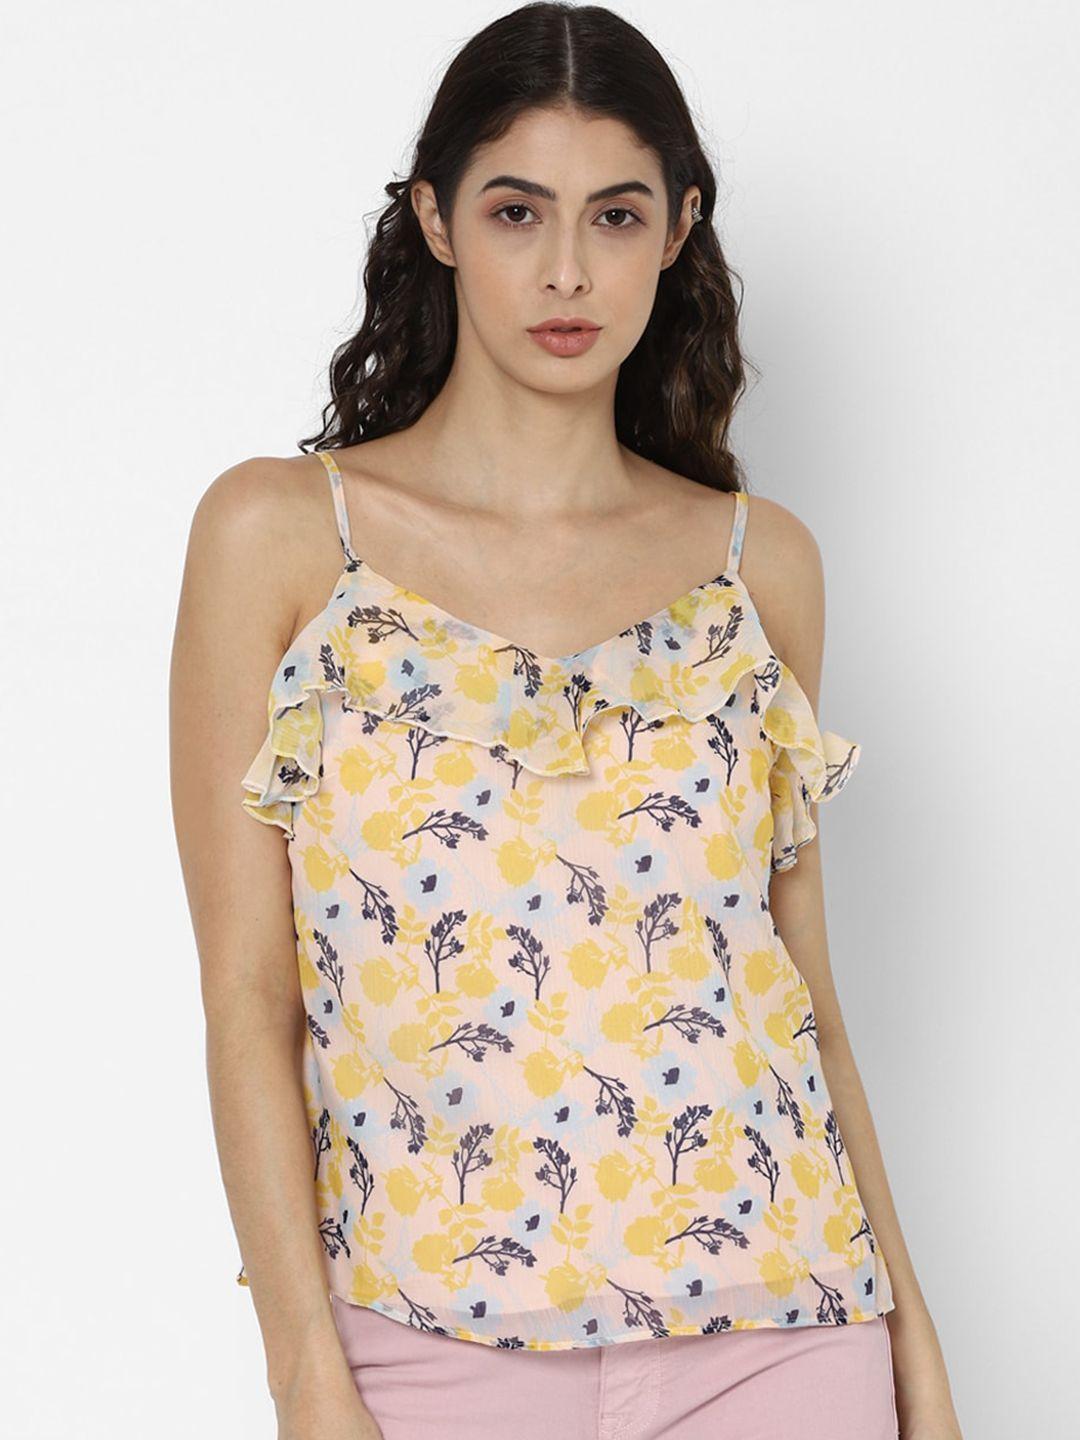 allen solly woman cream-coloured & mustard yellow floral printed ruffled regular top